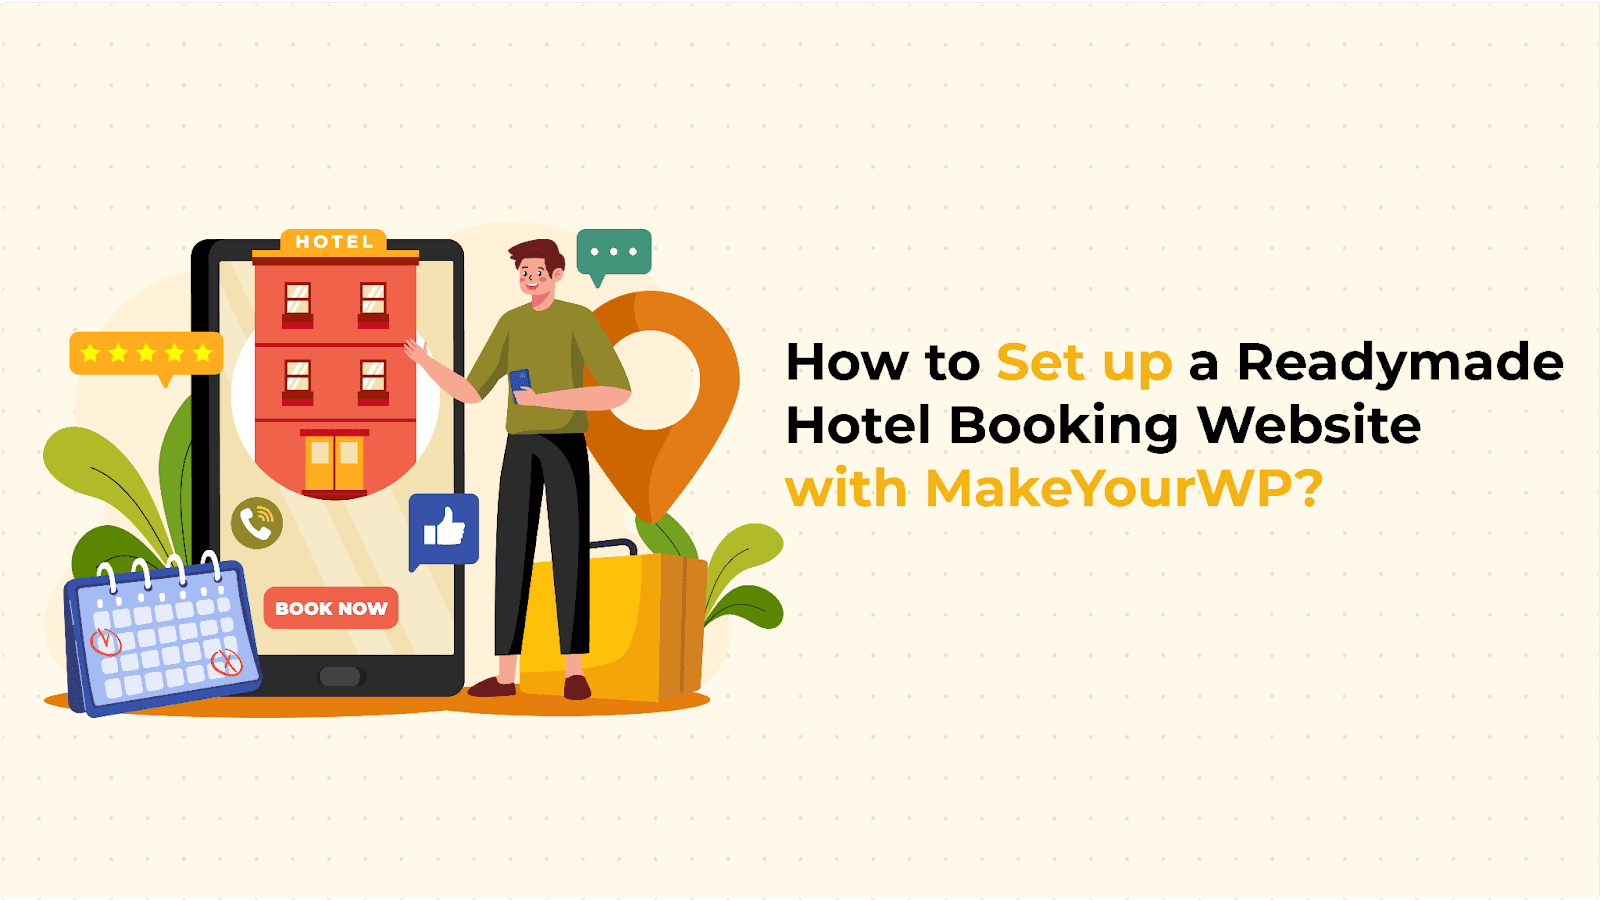 How to Set up a Readymade Hotel Booking Website with MakeYourWP?